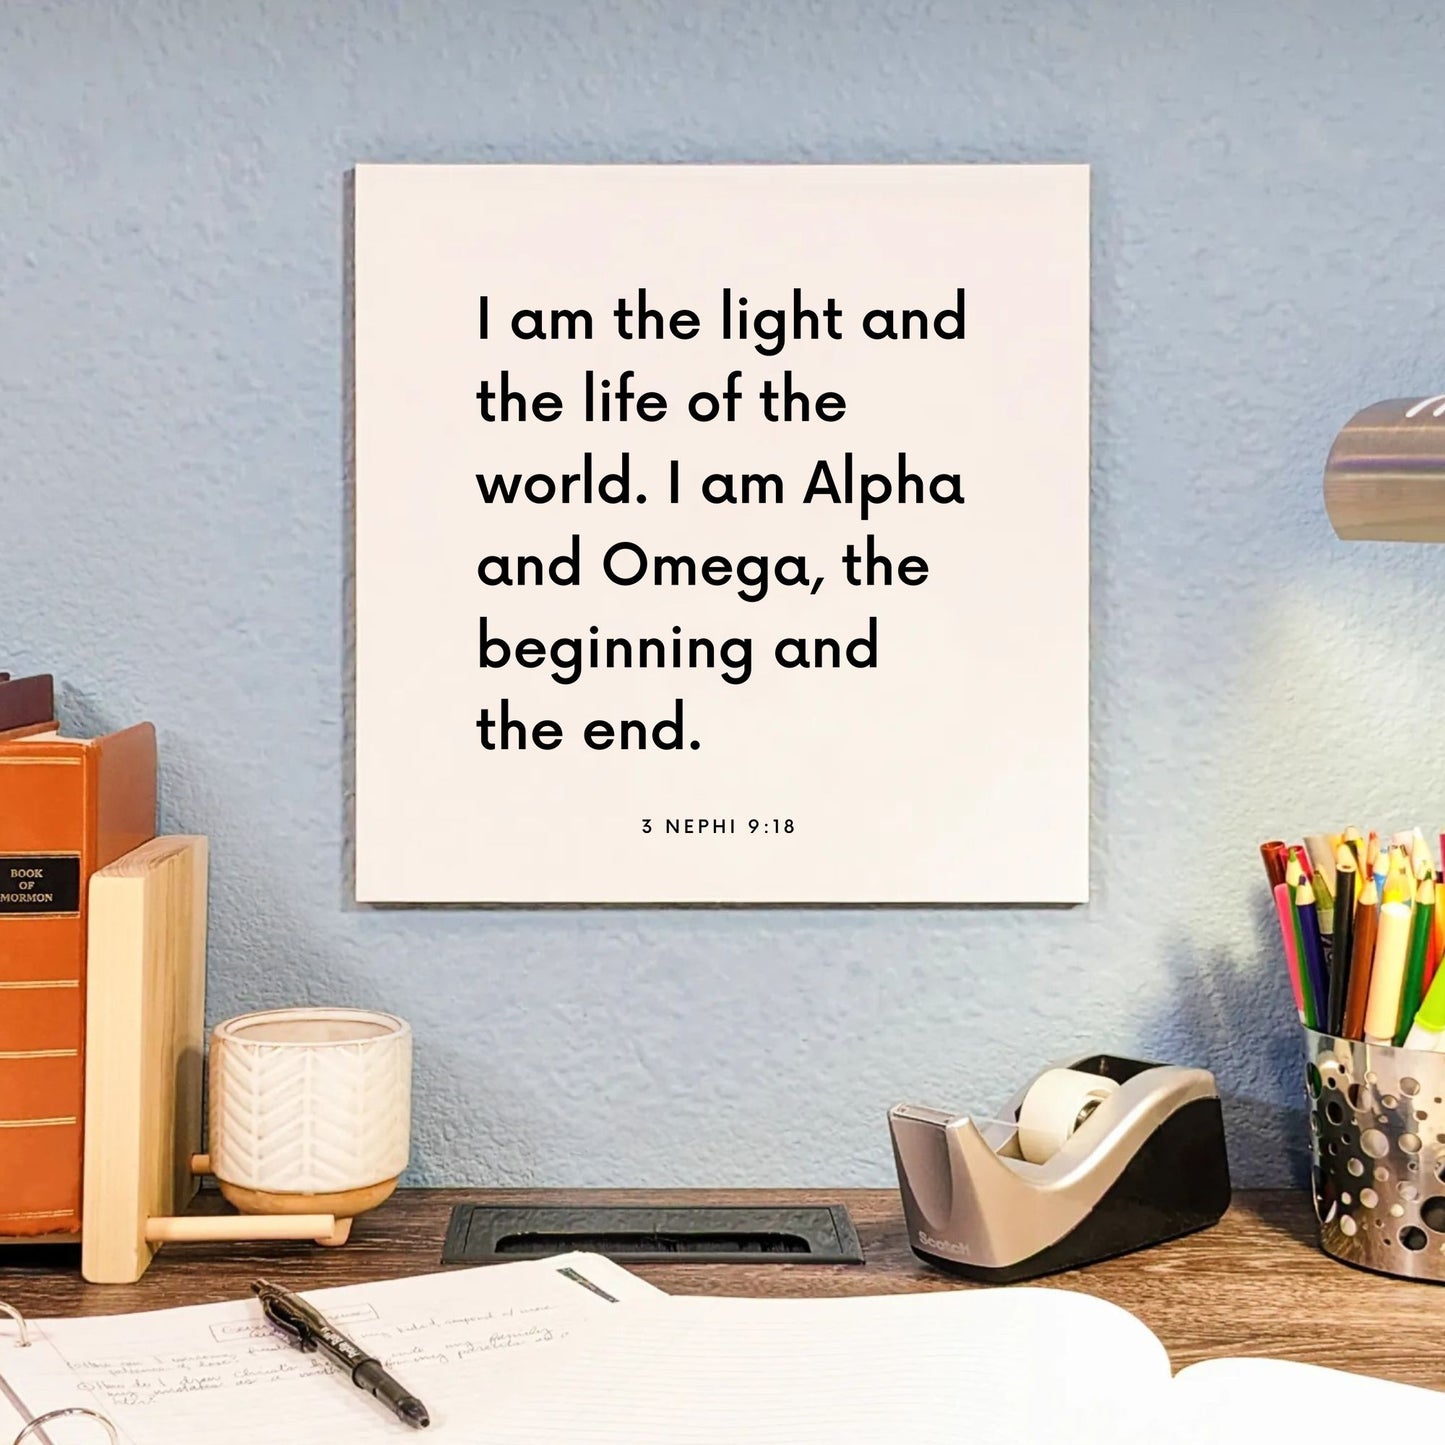 Desk mouting of the scripture tile for 3 Nephi 9:18  - "I am Alpha and Omega, the beginning and the end"